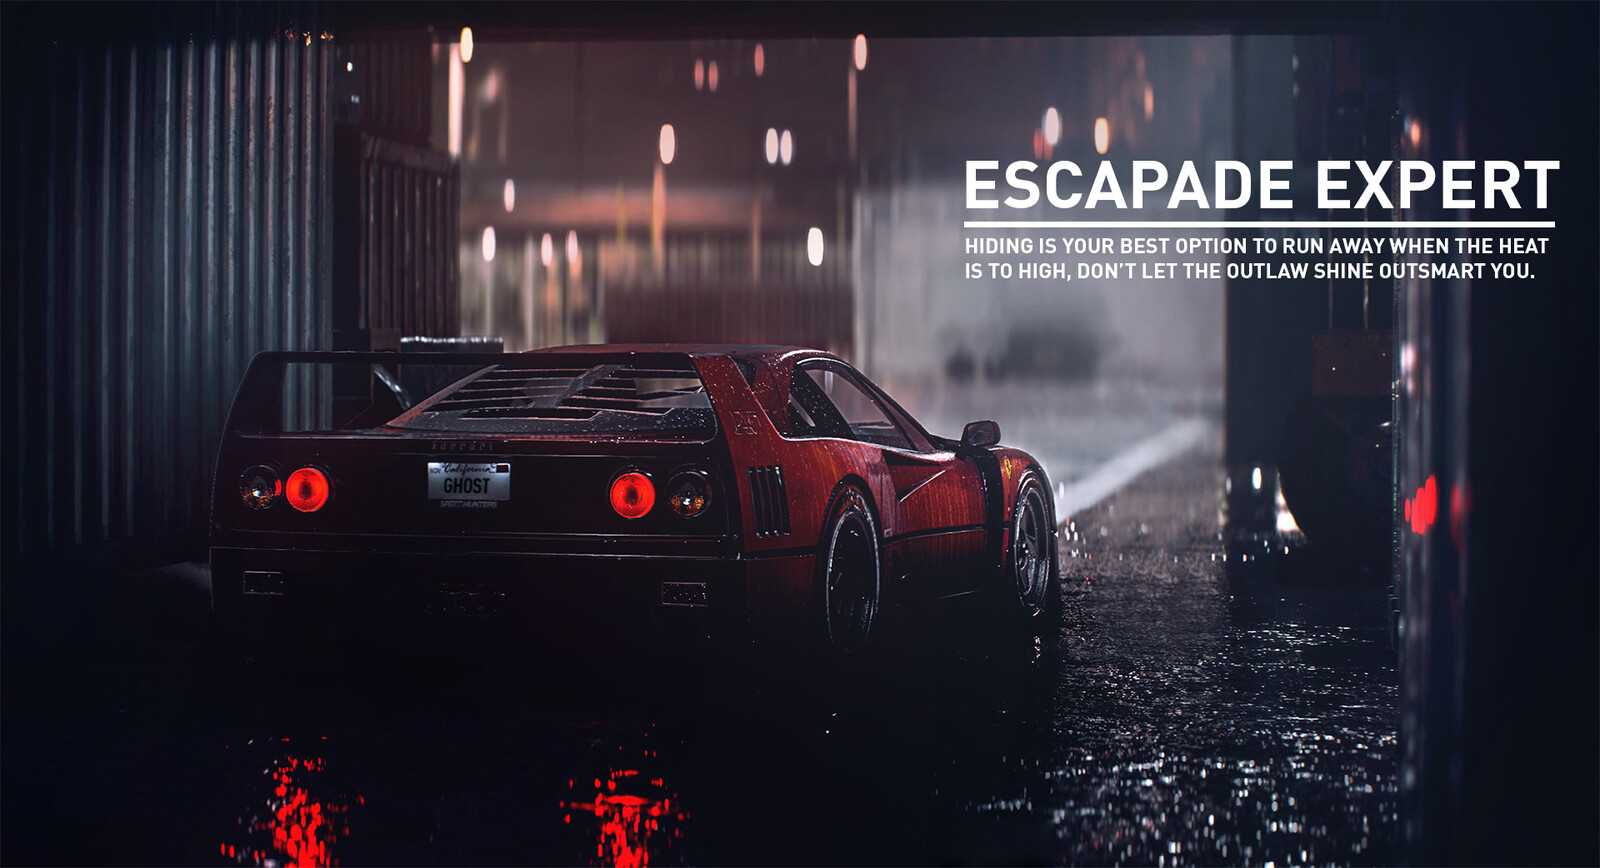 Need for Speed Rogue (Promo Image - 6) [Original Image by Mikhail Sharov]